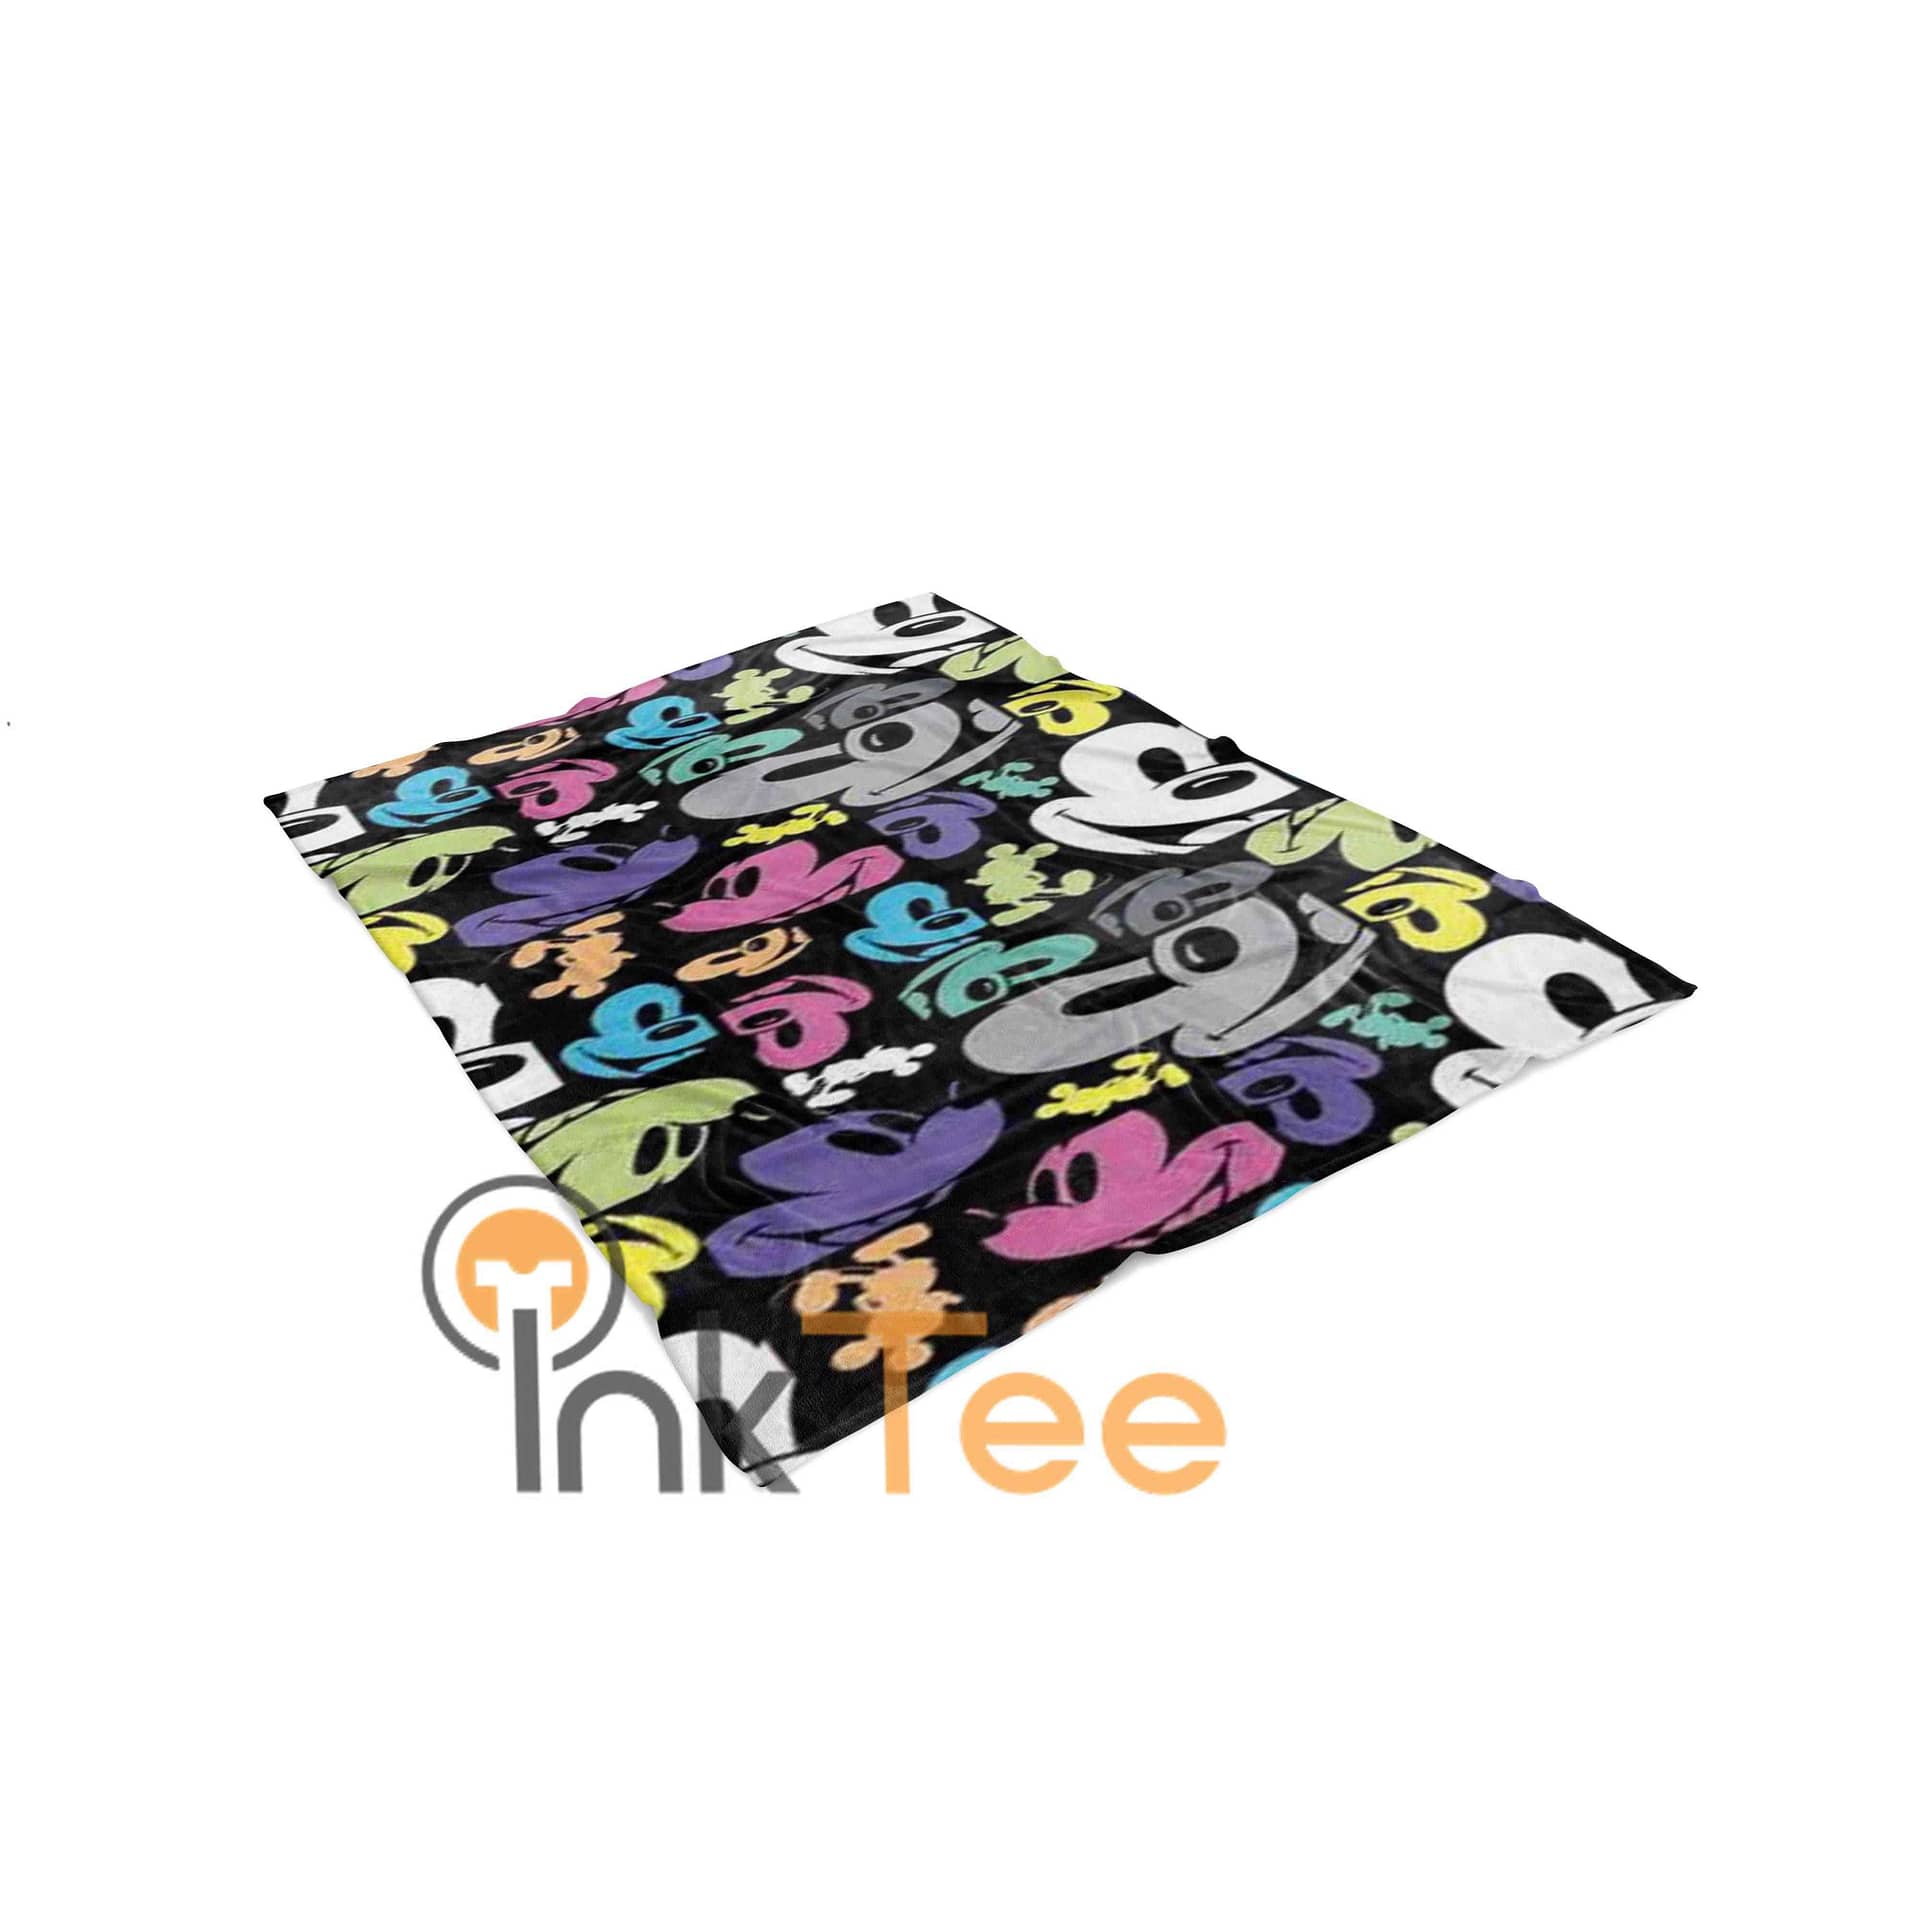 Inktee Store - Colorful Mickey Mouse Limited Edition Amazon Best Seller Sku 4087 Fleece Blanket Image